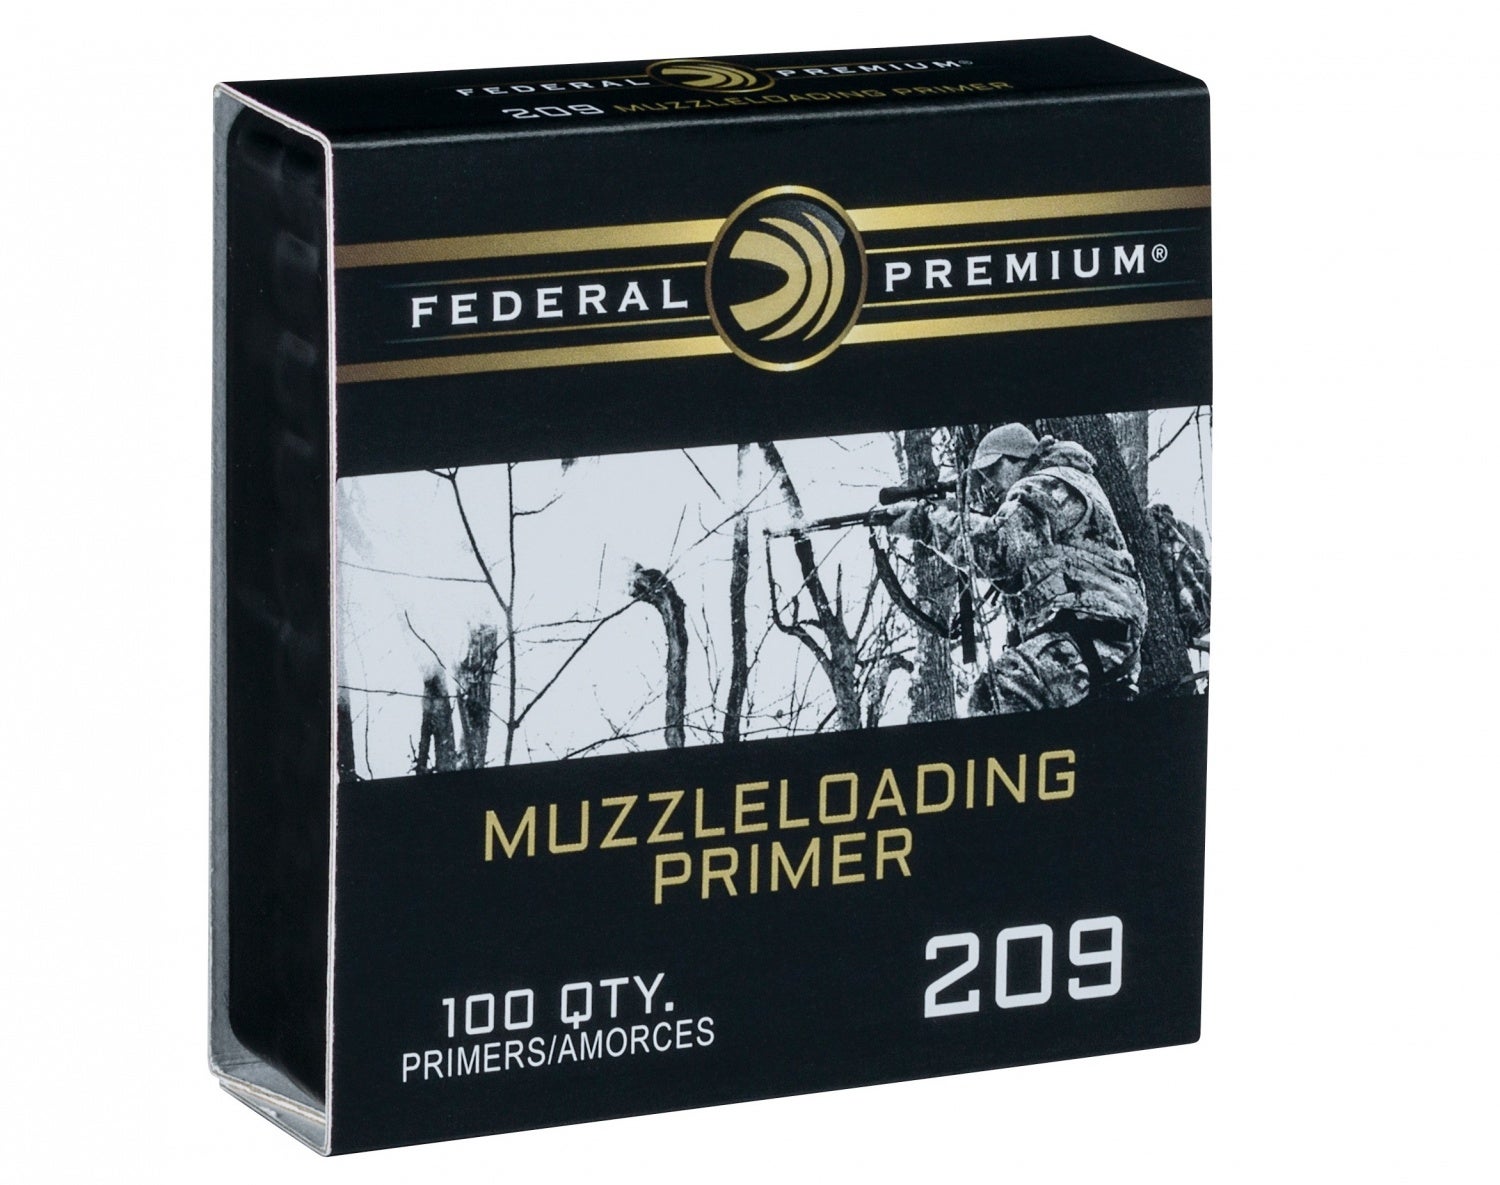 federal-premium-introduces-new-209-primer-to-ignite-your-muzzleloading